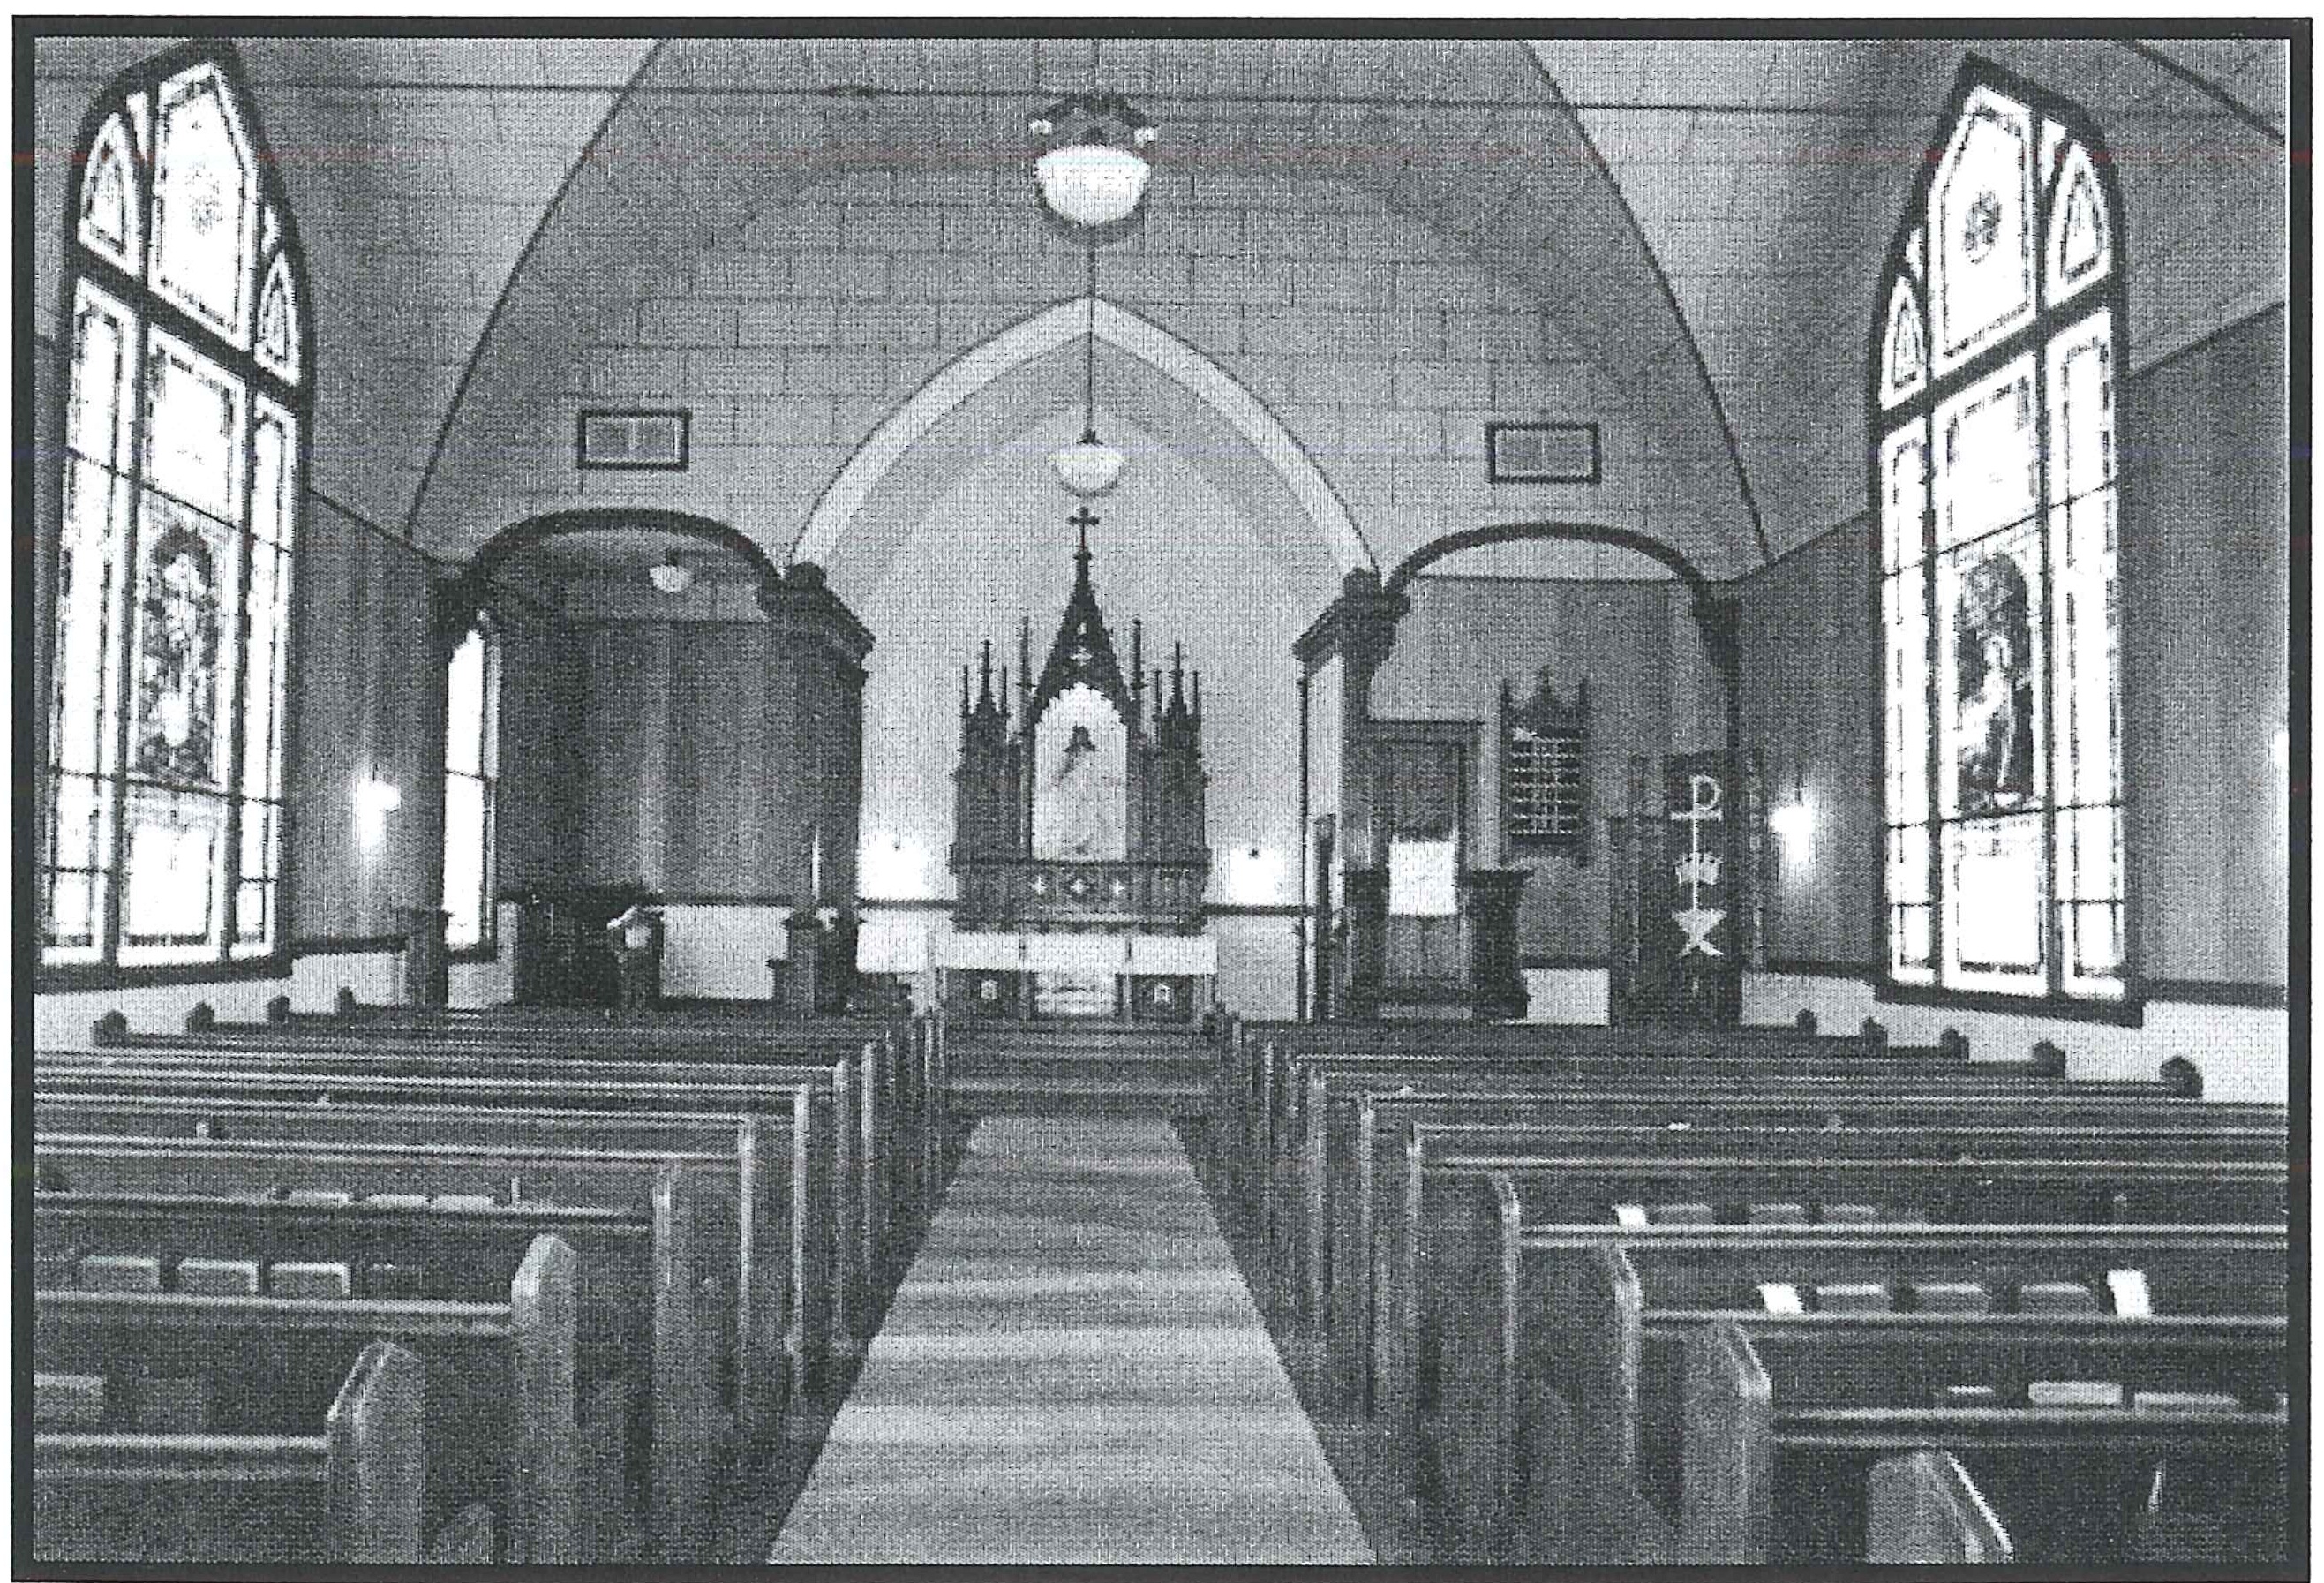 St. Peter's Lutheran Church Interior of 1923 building